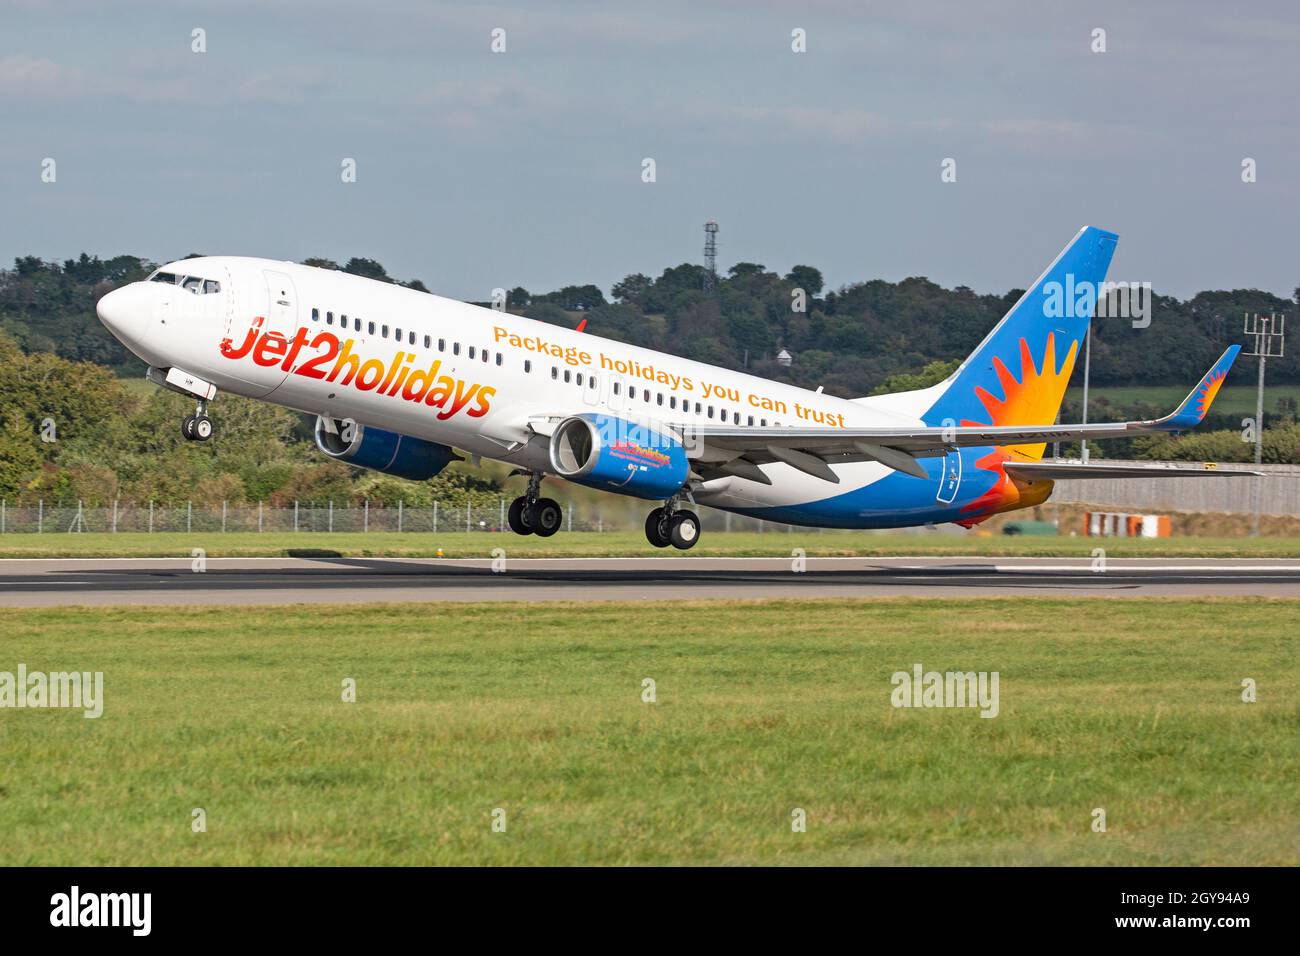 A Jet2 Holidays Boeing 737-800 Airliner, G-JZHM, taking off from Bristol Lulsgate Airport, England. Stock Photo